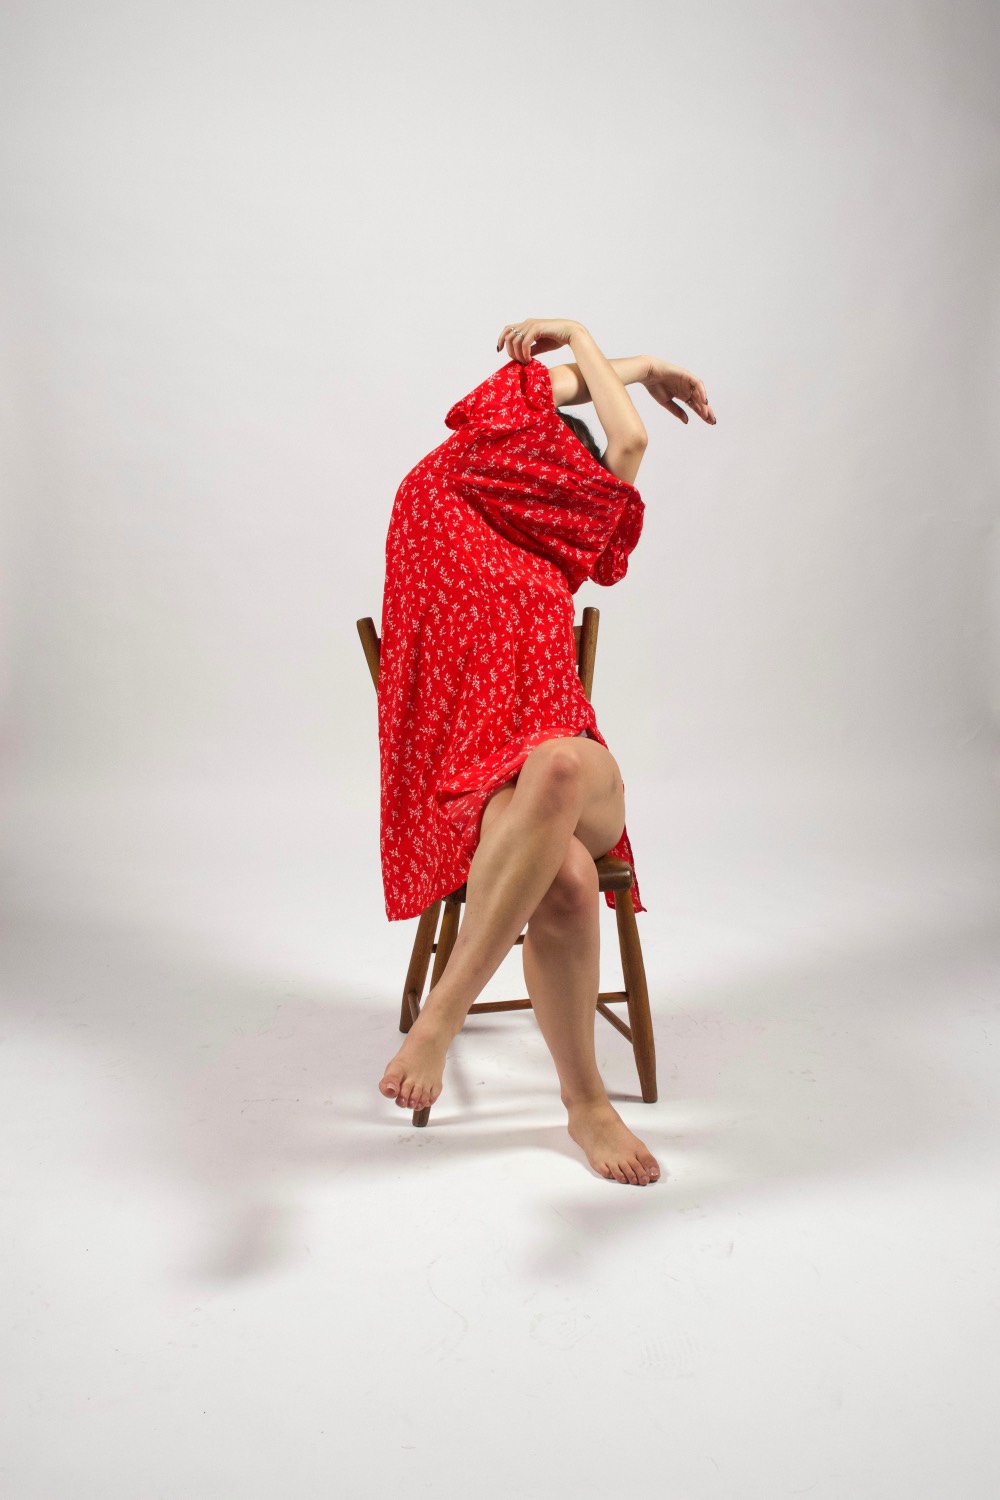 A sitting woman removing a red dress over her head.